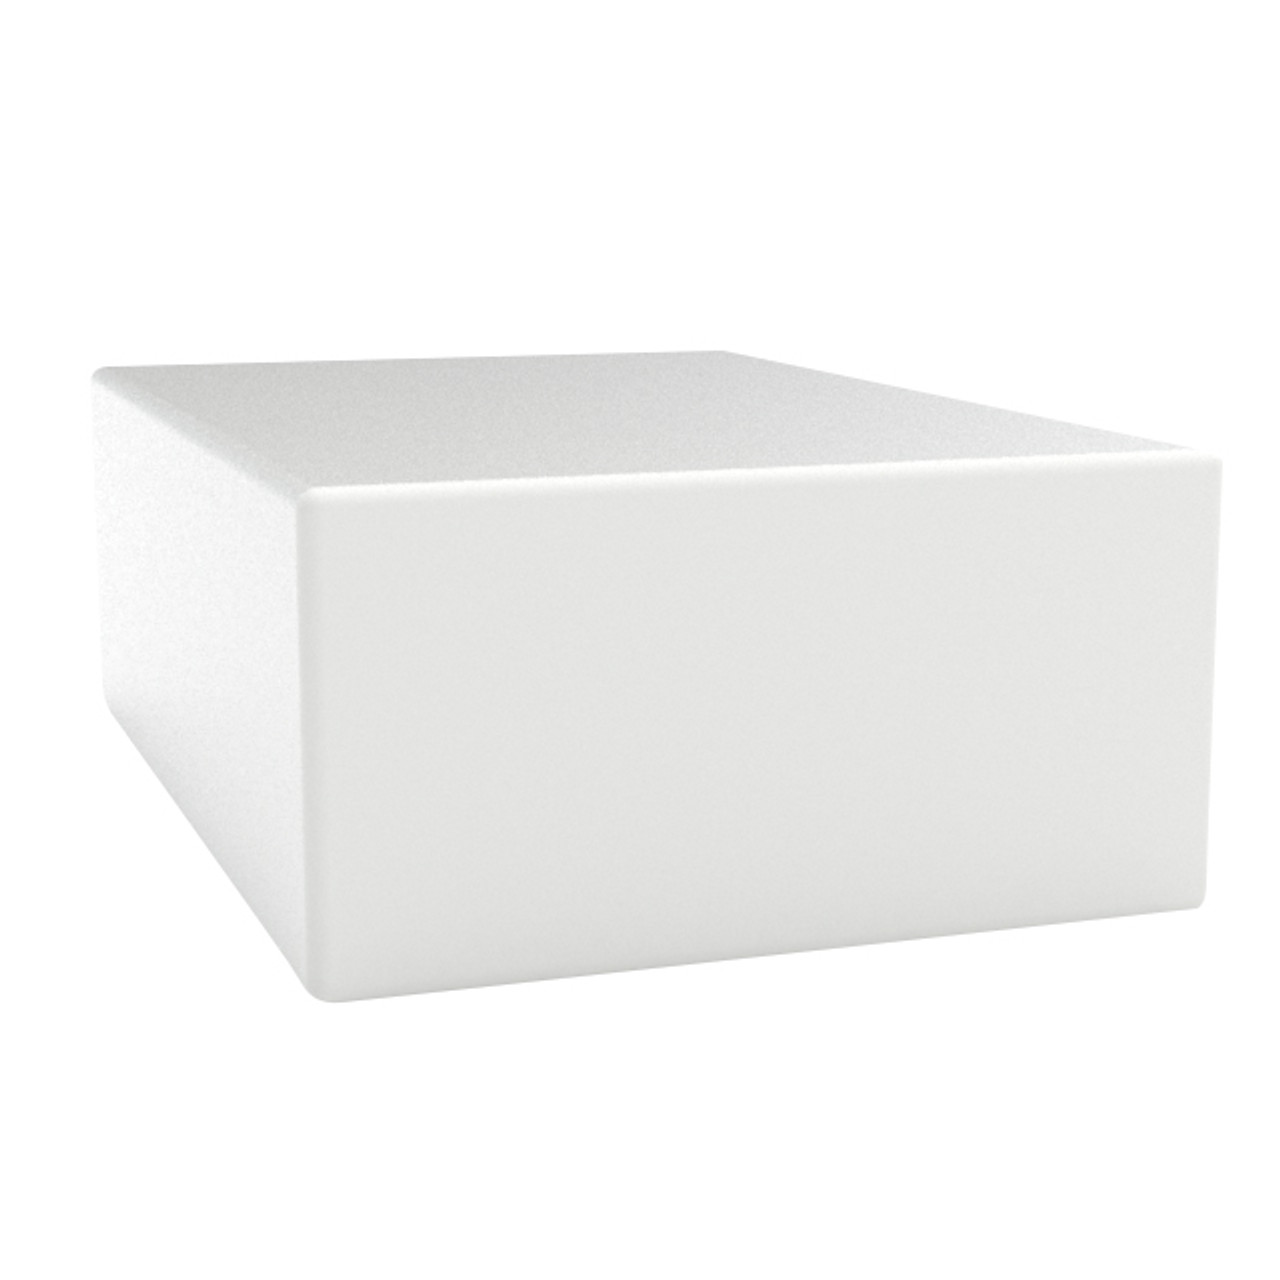 An image of a 6 Gallon PE Ronco White Cylindrical Open Top Tank | 6LDPE